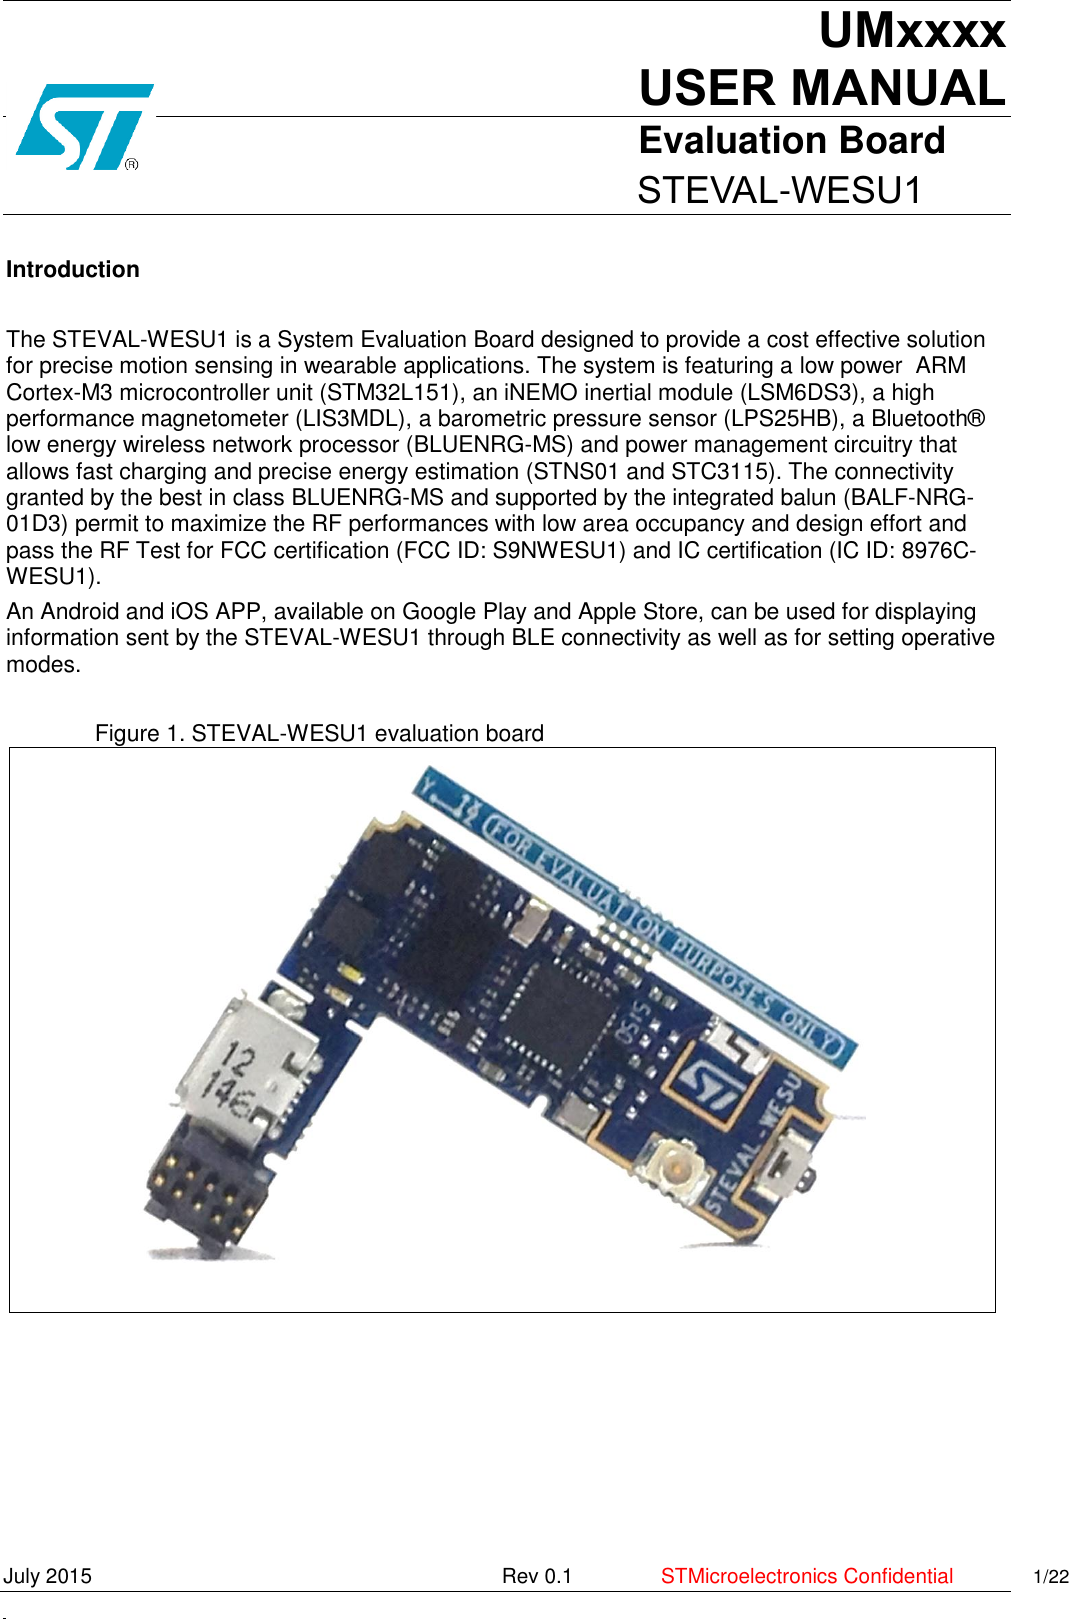     UMxxxx USER MANUALEvaluation Board                          STEVAL-WESU1 July 2015    Rev 0.1  STMicroelectronics Confidential 1/22     Introduction  The STEVAL-WESU1 is a System Evaluation Board designed to provide a cost effective solution for precise motion sensing in wearable applications. The system is featuring a low power  ARM Cortex-M3 microcontroller unit (STM32L151), an iNEMO inertial module (LSM6DS3), a high performance magnetometer (LIS3MDL), a barometric pressure sensor (LPS25HB), a Bluetooth® low energy wireless network processor (BLUENRG-MS) and power management circuitry that allows fast charging and precise energy estimation (STNS01 and STC3115). The connectivity granted by the best in class BLUENRG-MS and supported by the integrated balun (BALF-NRG-01D3) permit to maximize the RF performances with low area occupancy and design effort and pass the RF Test for FCC certification (FCC ID: S9NWESU1) and IC certification (IC ID: 8976C-WESU1). An Android and iOS APP, available on Google Play and Apple Store, can be used for displaying information sent by the STEVAL-WESU1 through BLE connectivity as well as for setting operative modes.  Figure 1. STEVAL-WESU1 evaluation board     